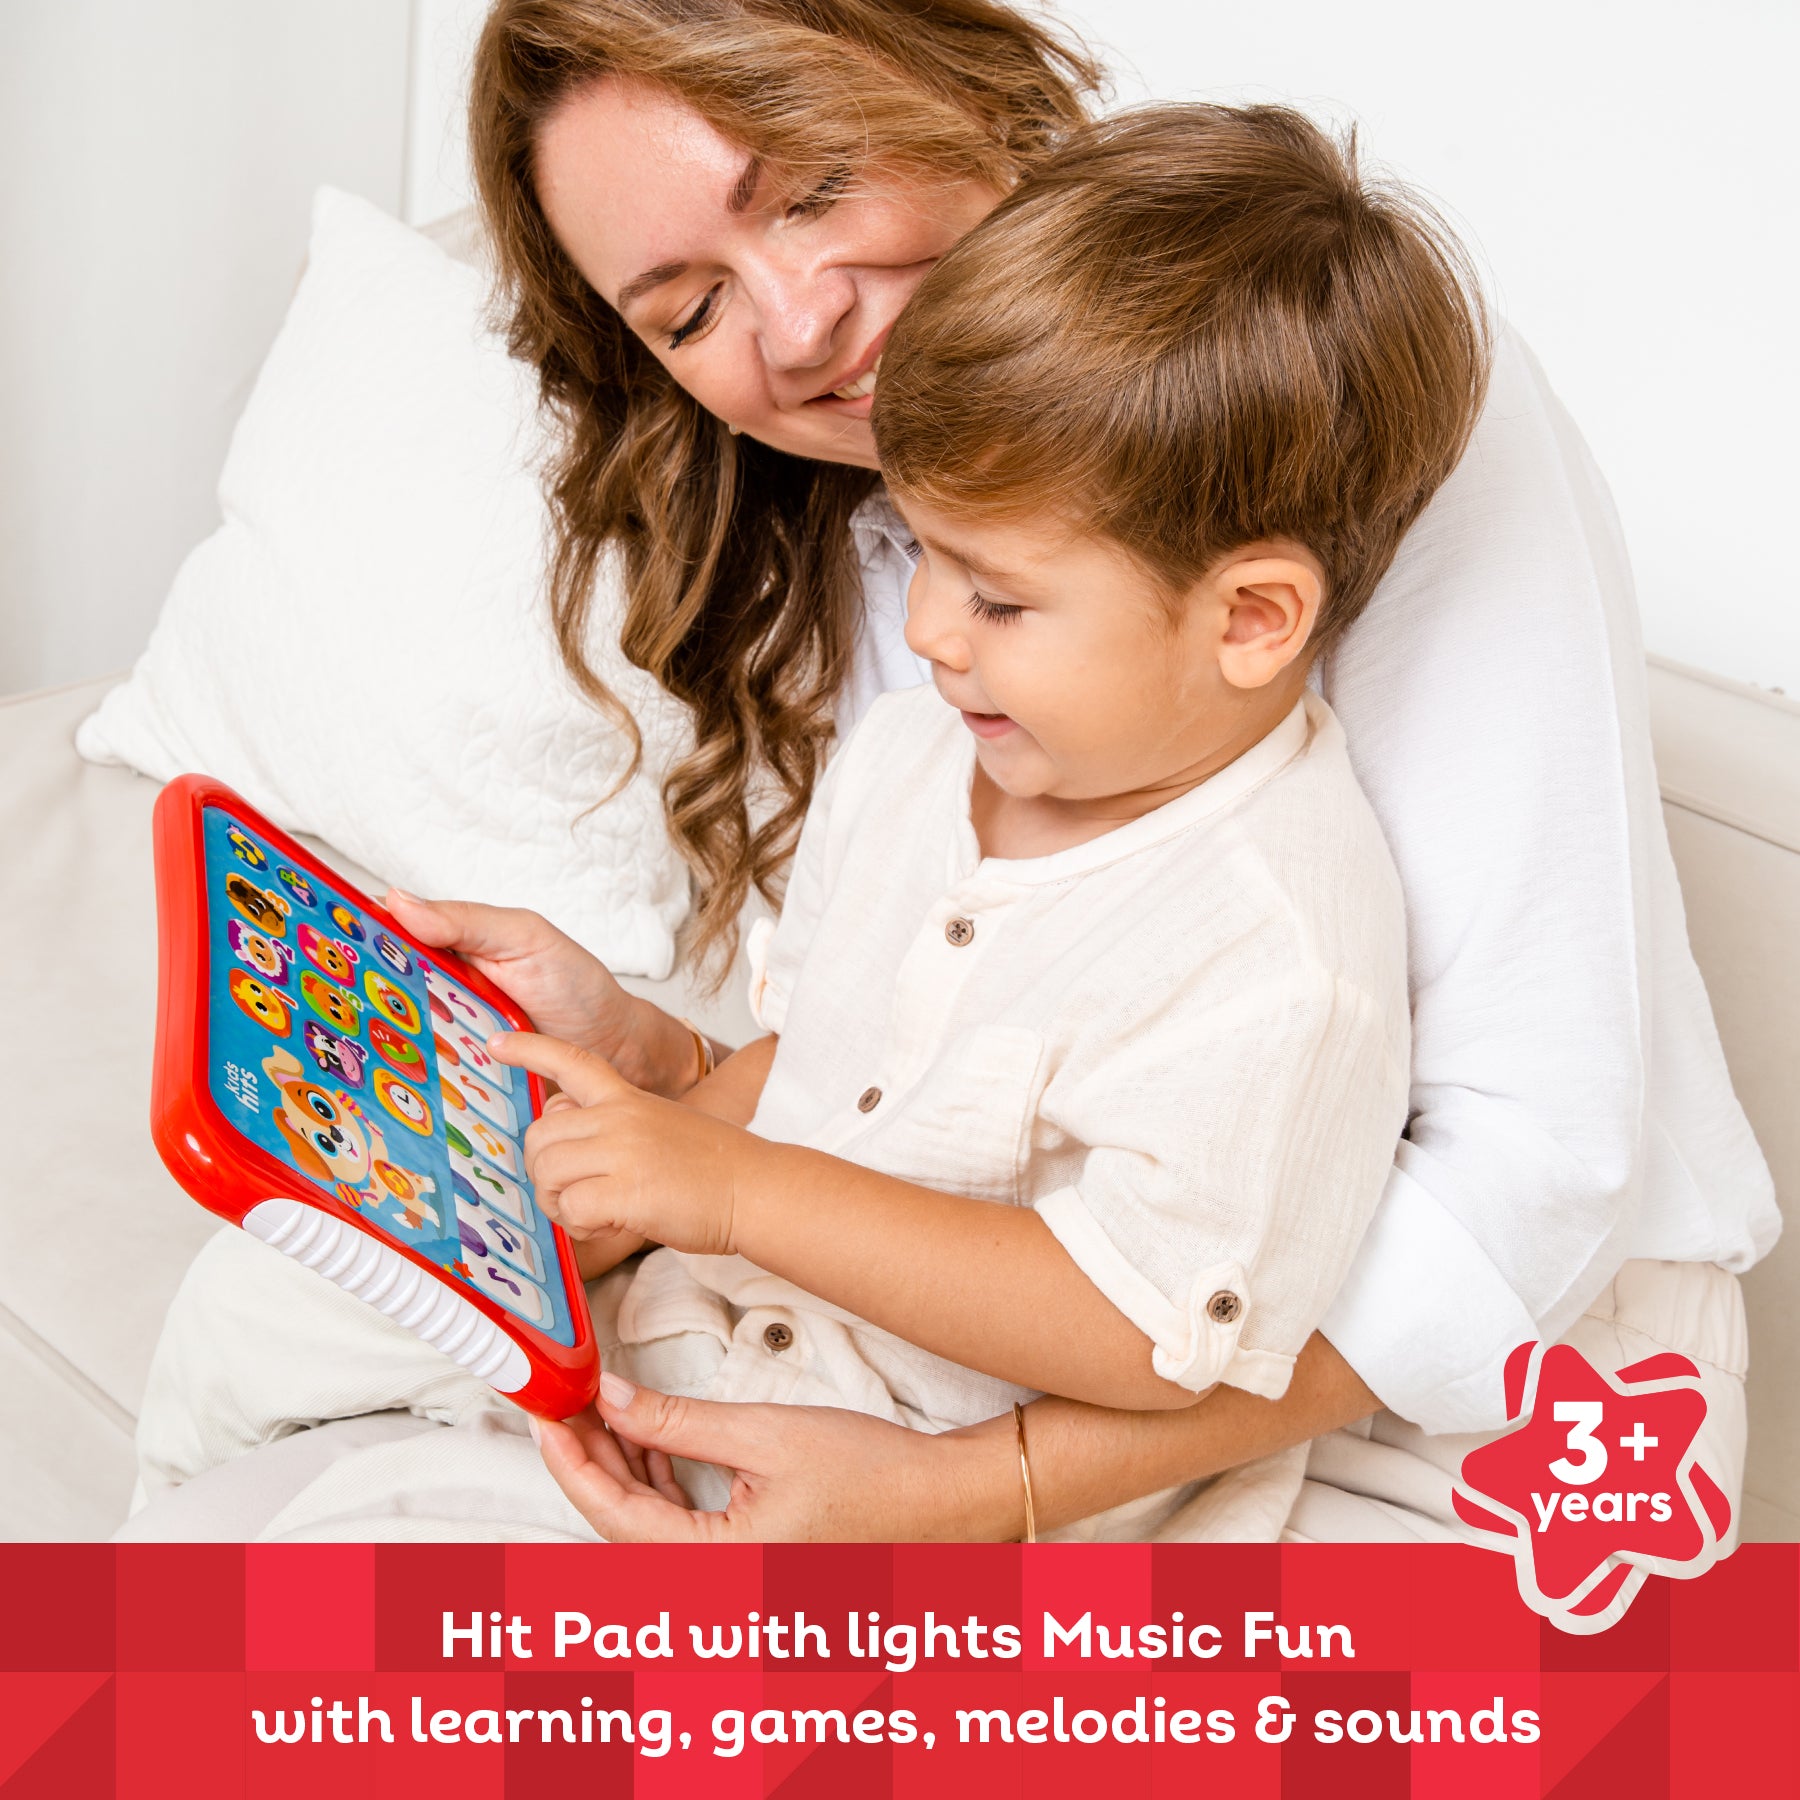 Kids Hits Educational Toddler Hit Pad  with lights Toy Music Fun